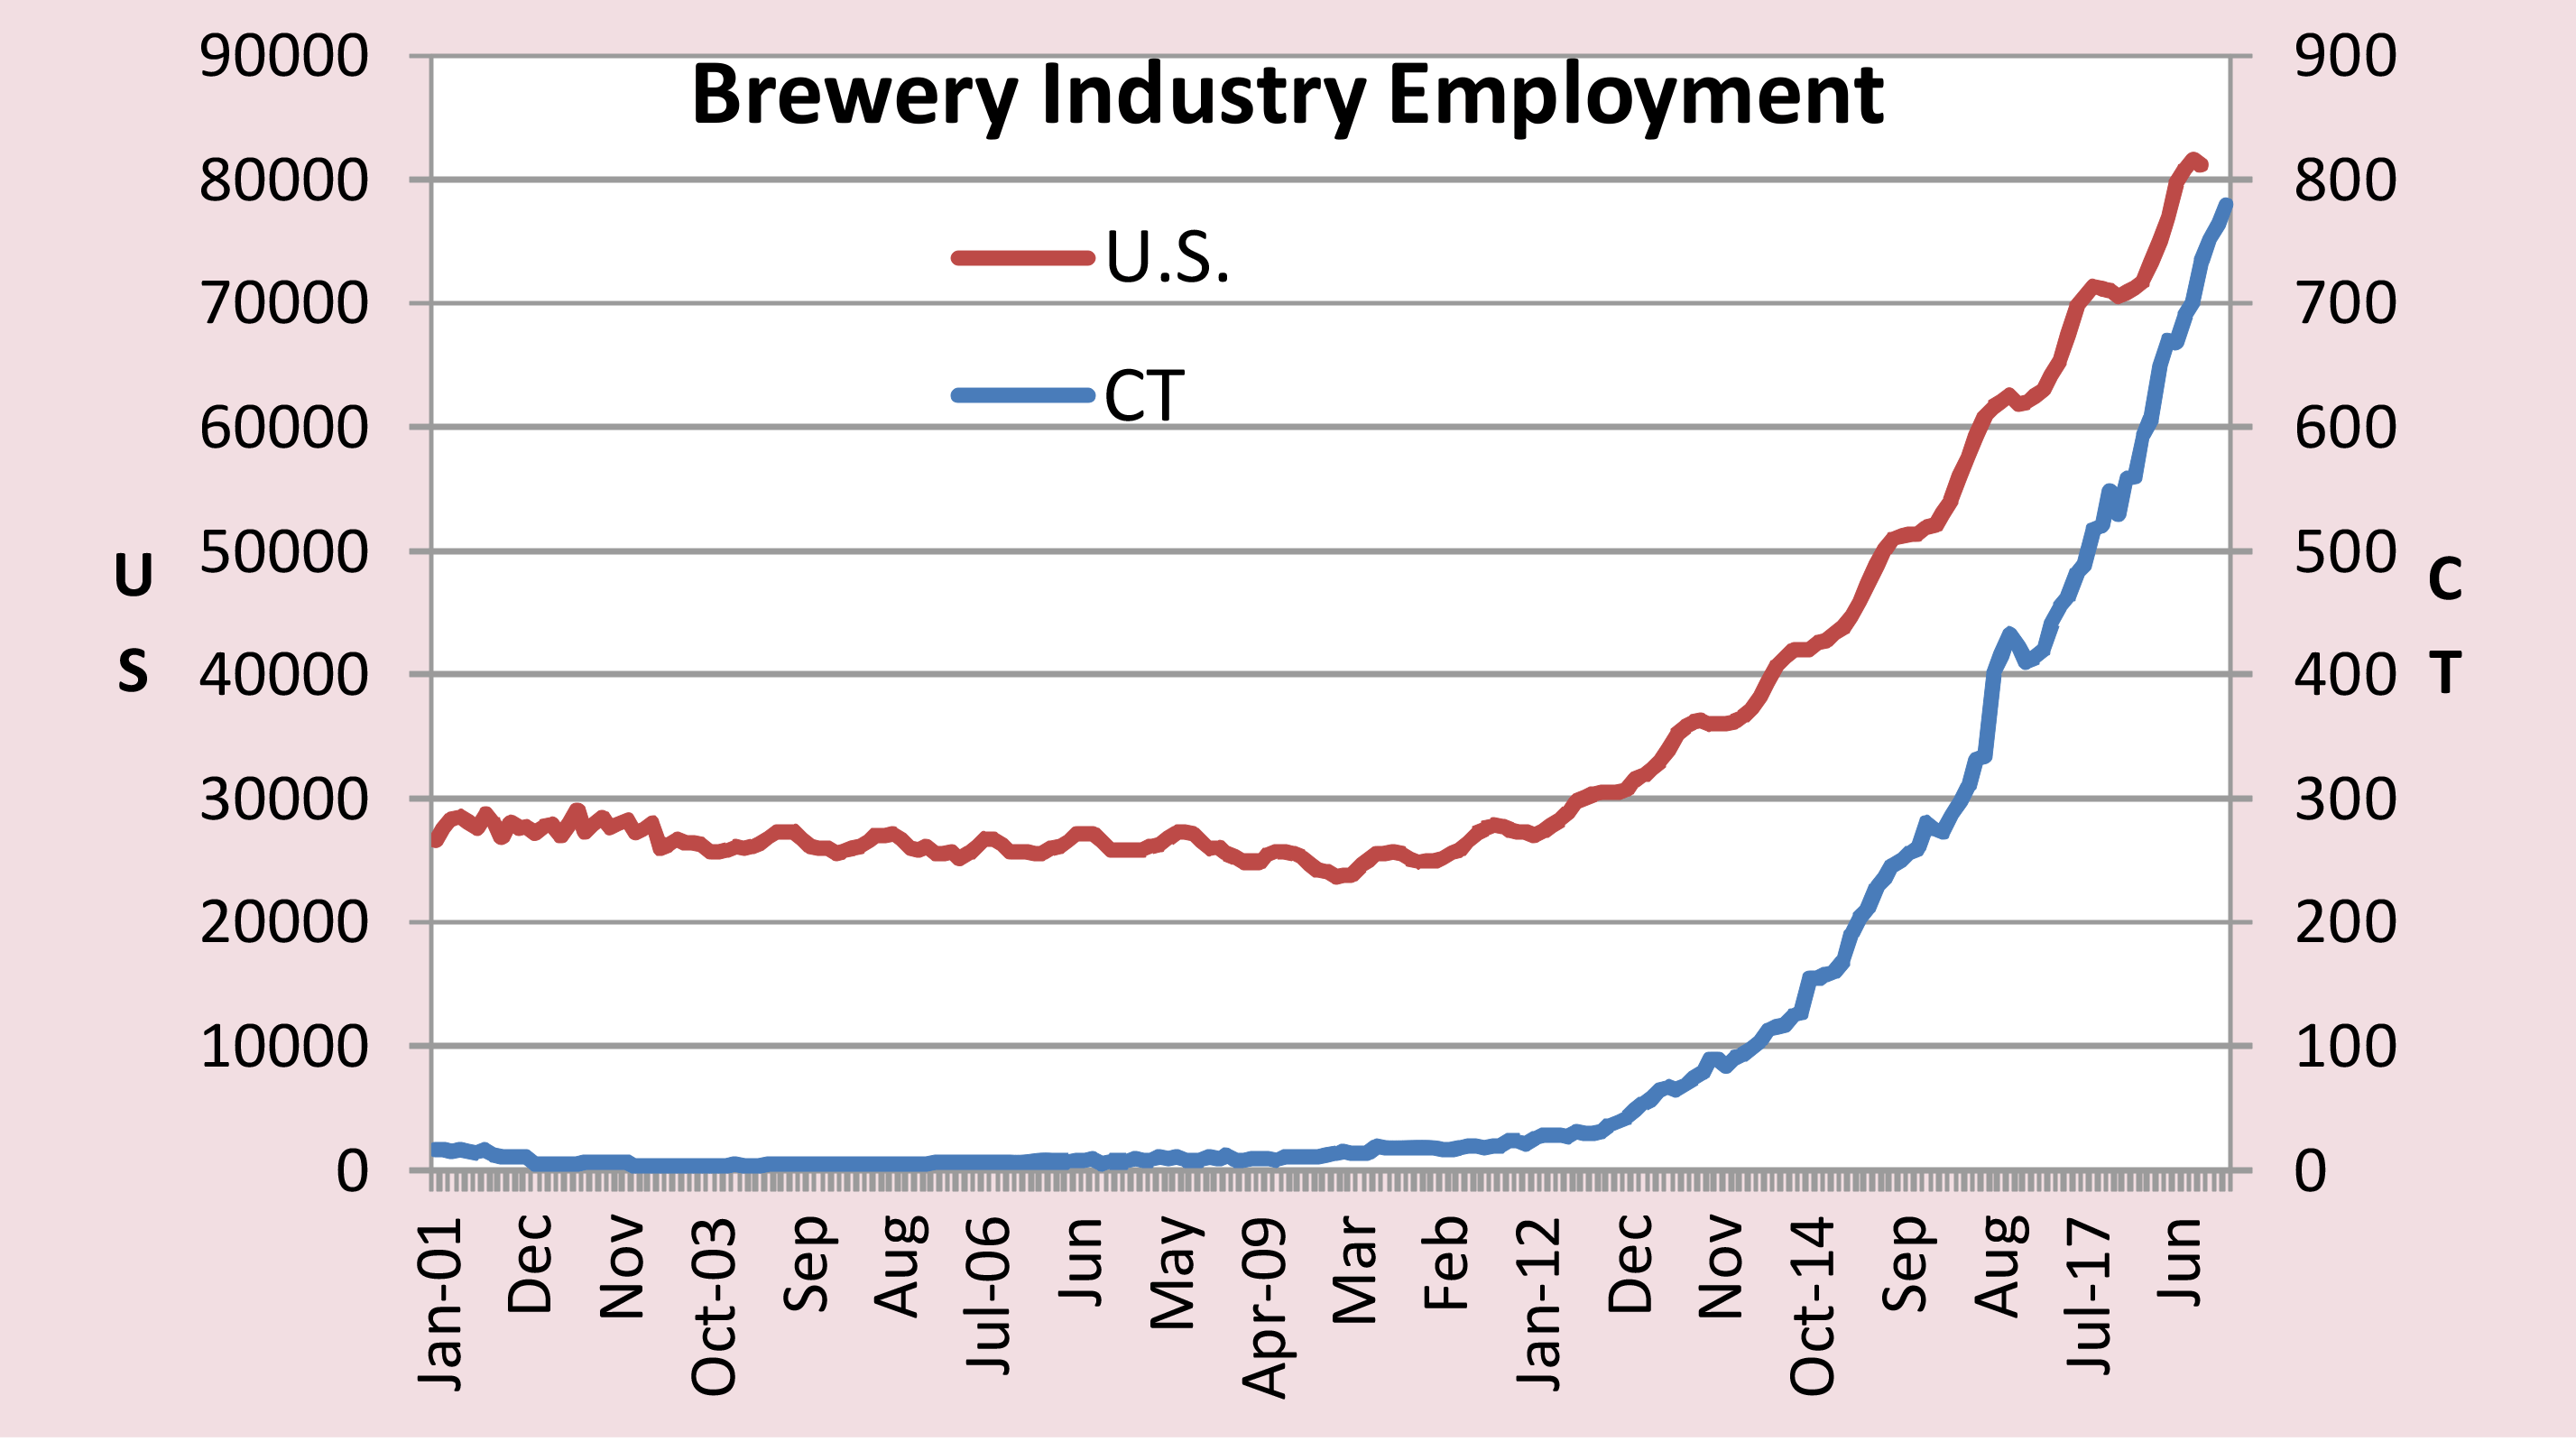 Figure 1: Brewery Industry Employment